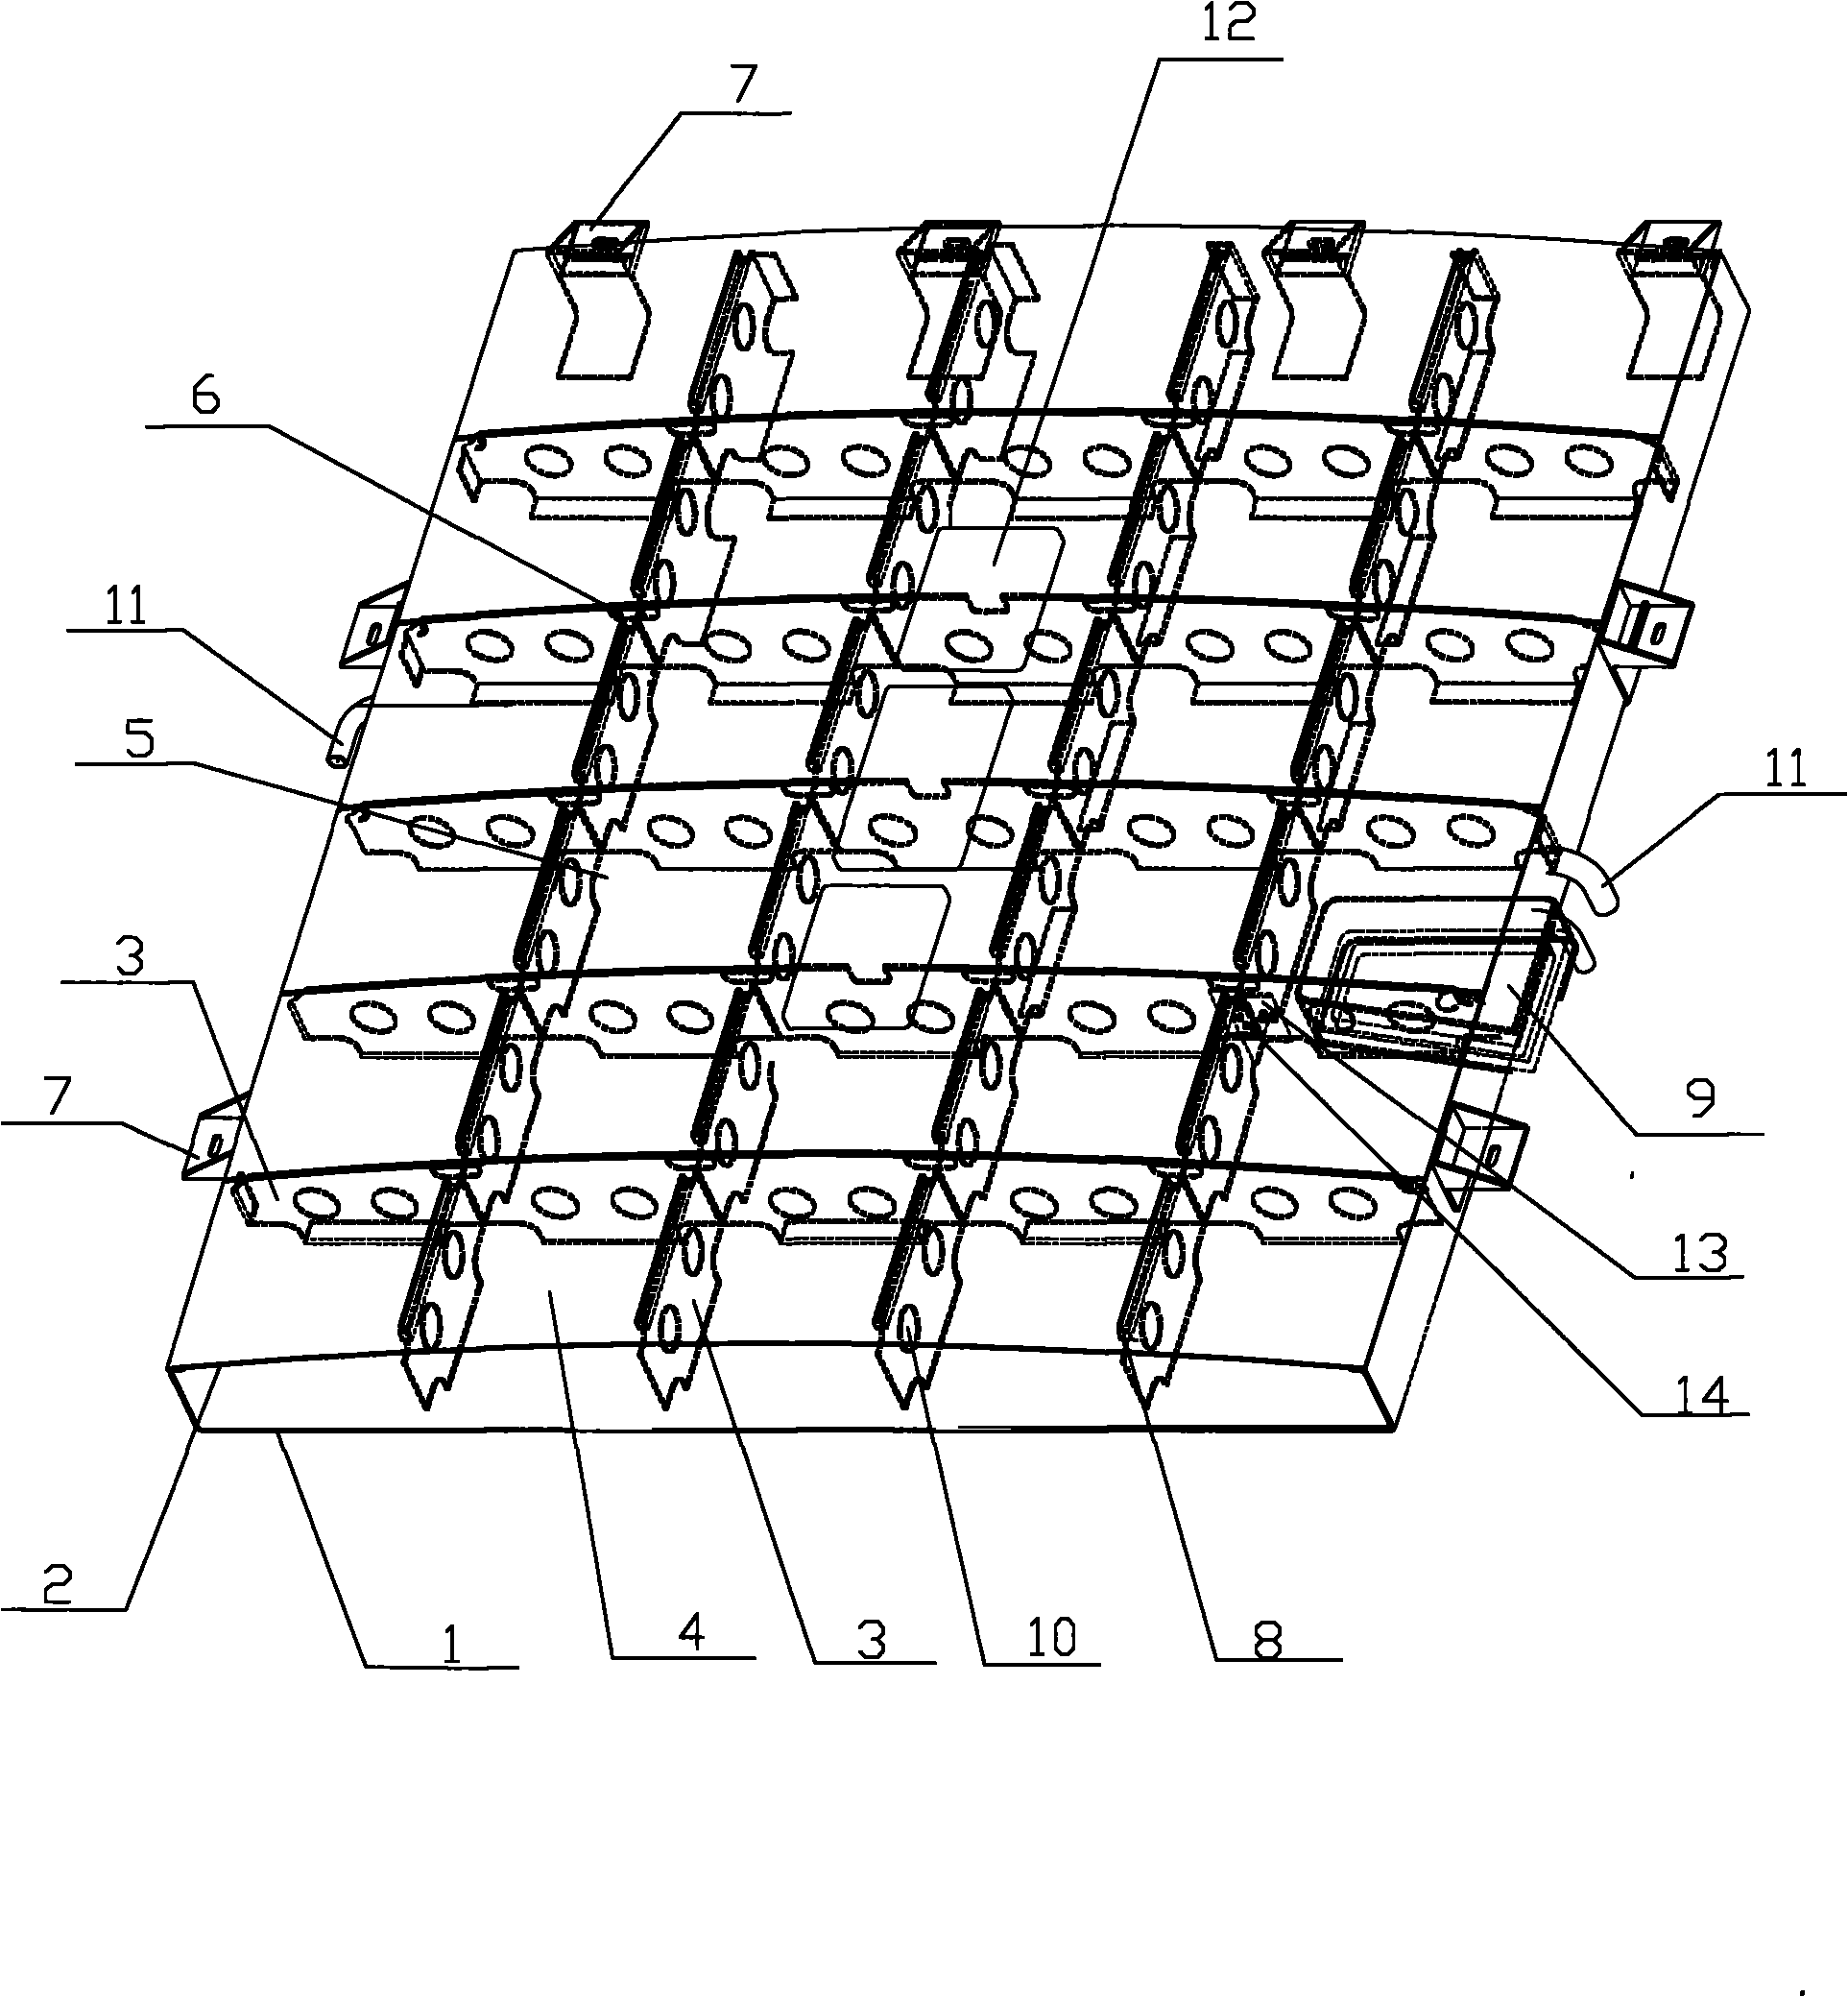 Low-section water tank for integrated carrying-type railway vehicle